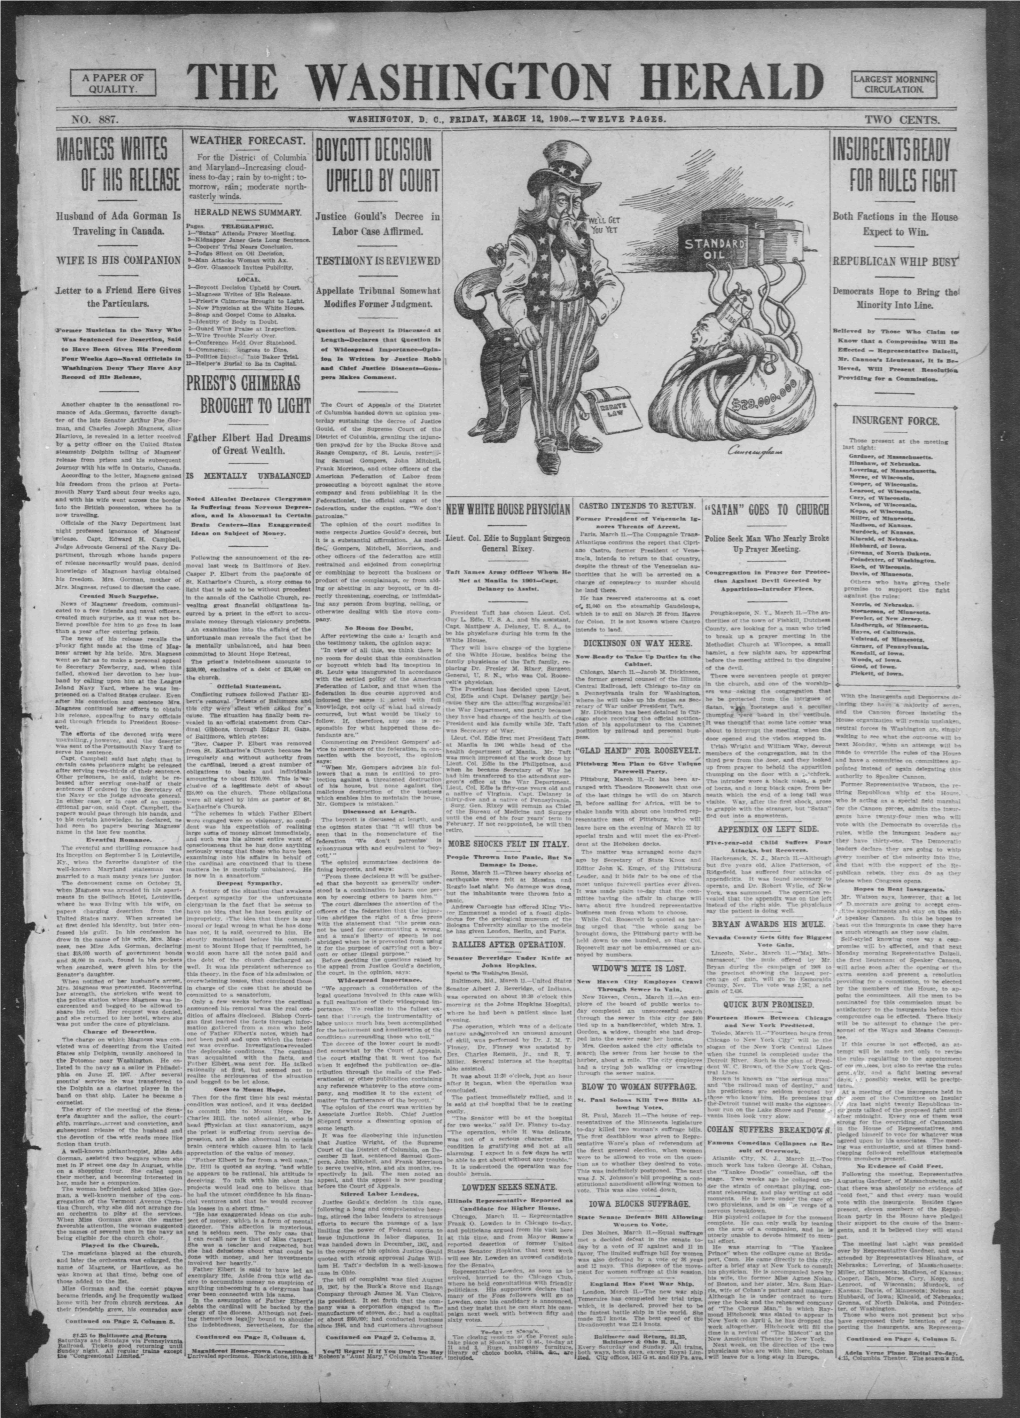 HERALD CIRCULATION I NO 887 WASHINGTON D C FRIDAY XAECE 1 1909TWELVE PAGES TWO CENTS